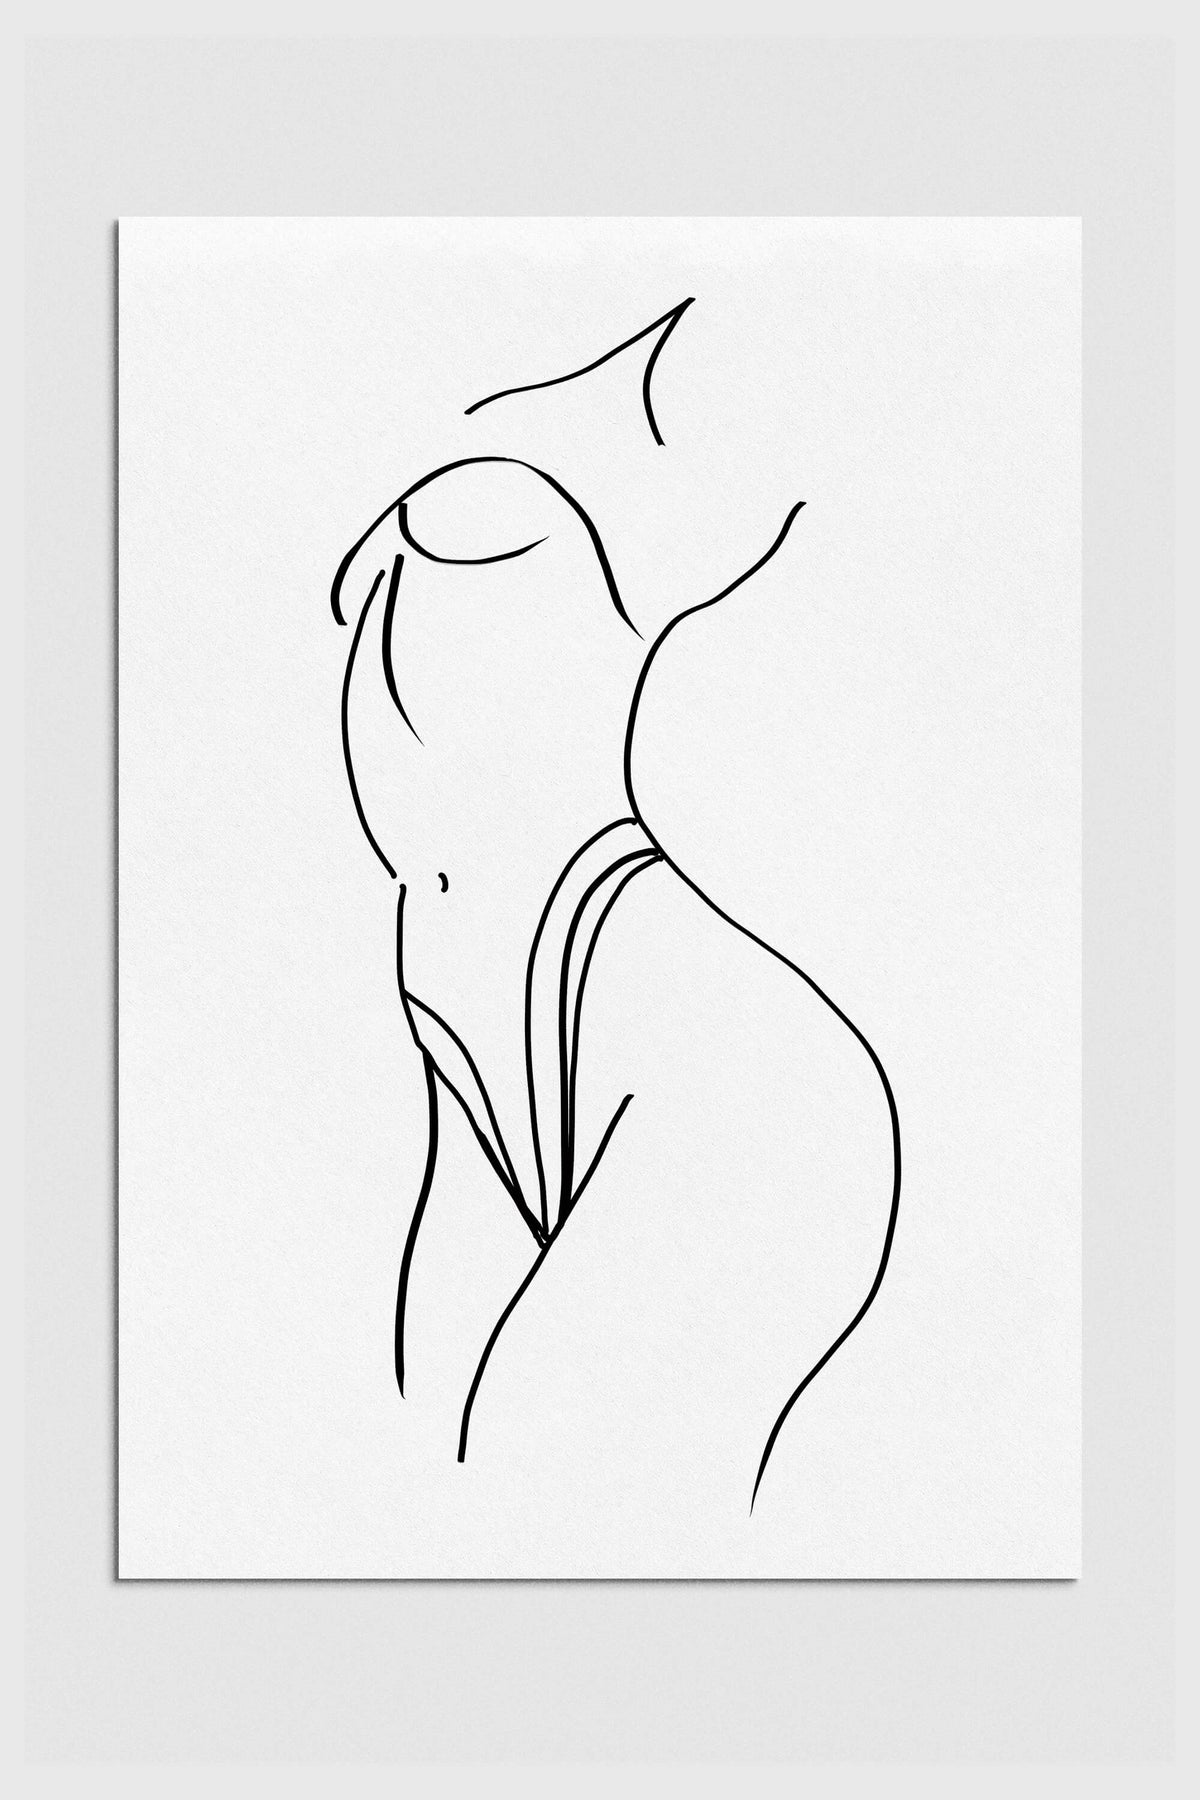 Black and white minimalist line drawing of a woman's silhouette, celebrating femininity and strength. The clean lines and simplicity add a touch of modern sophistication. Perfect for lovers of elegant and contemporary wall art.